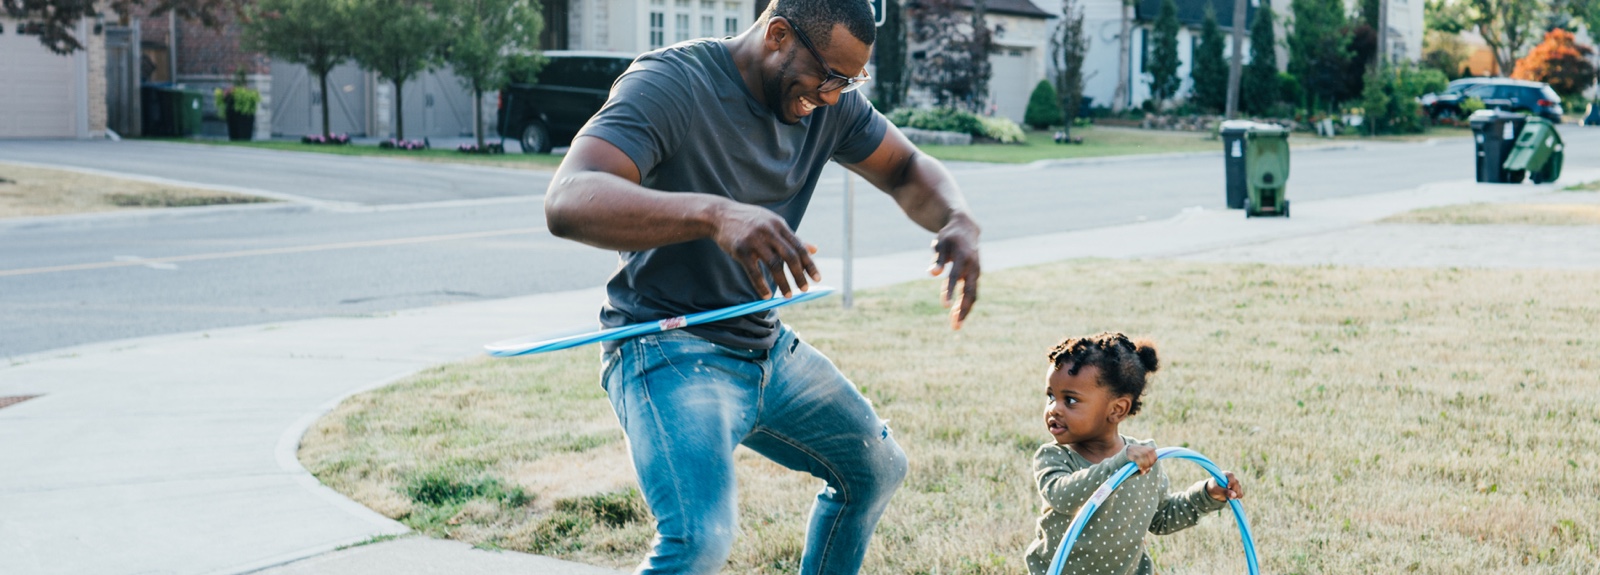 A dad hula hooping with a toddler